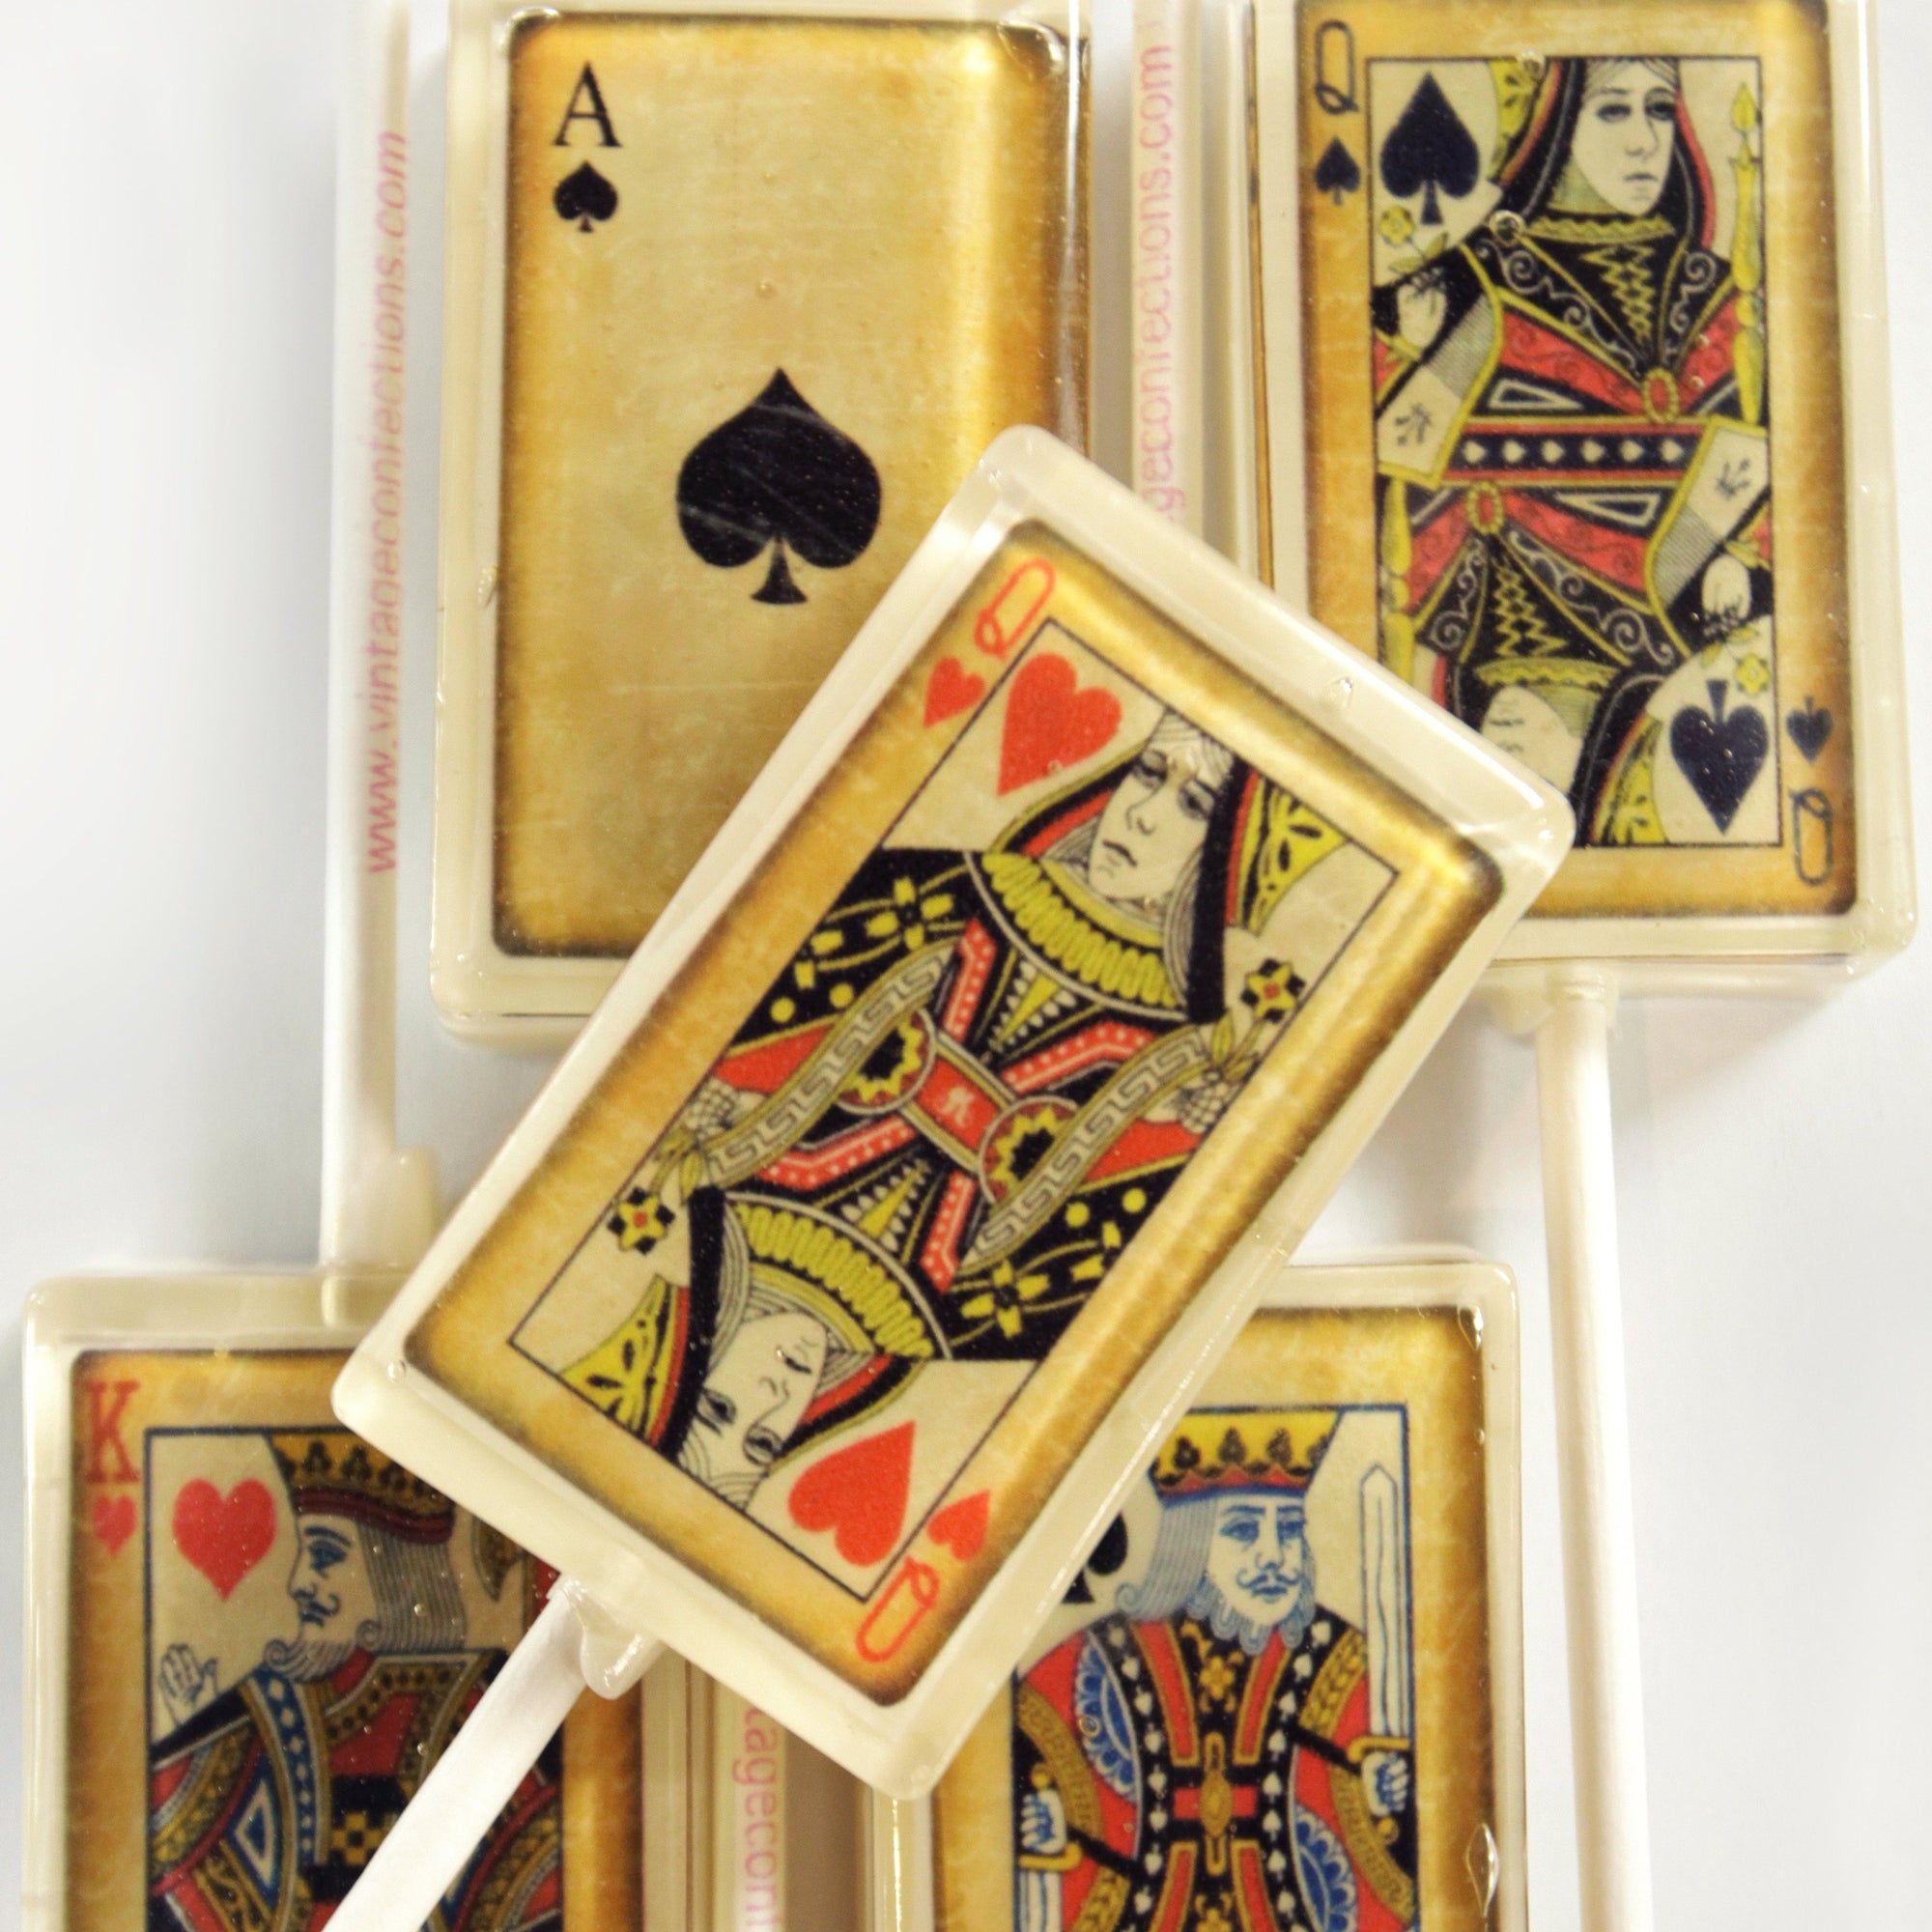 Vintage Playing Card Lollipops 5-piece set by I Want Candy!